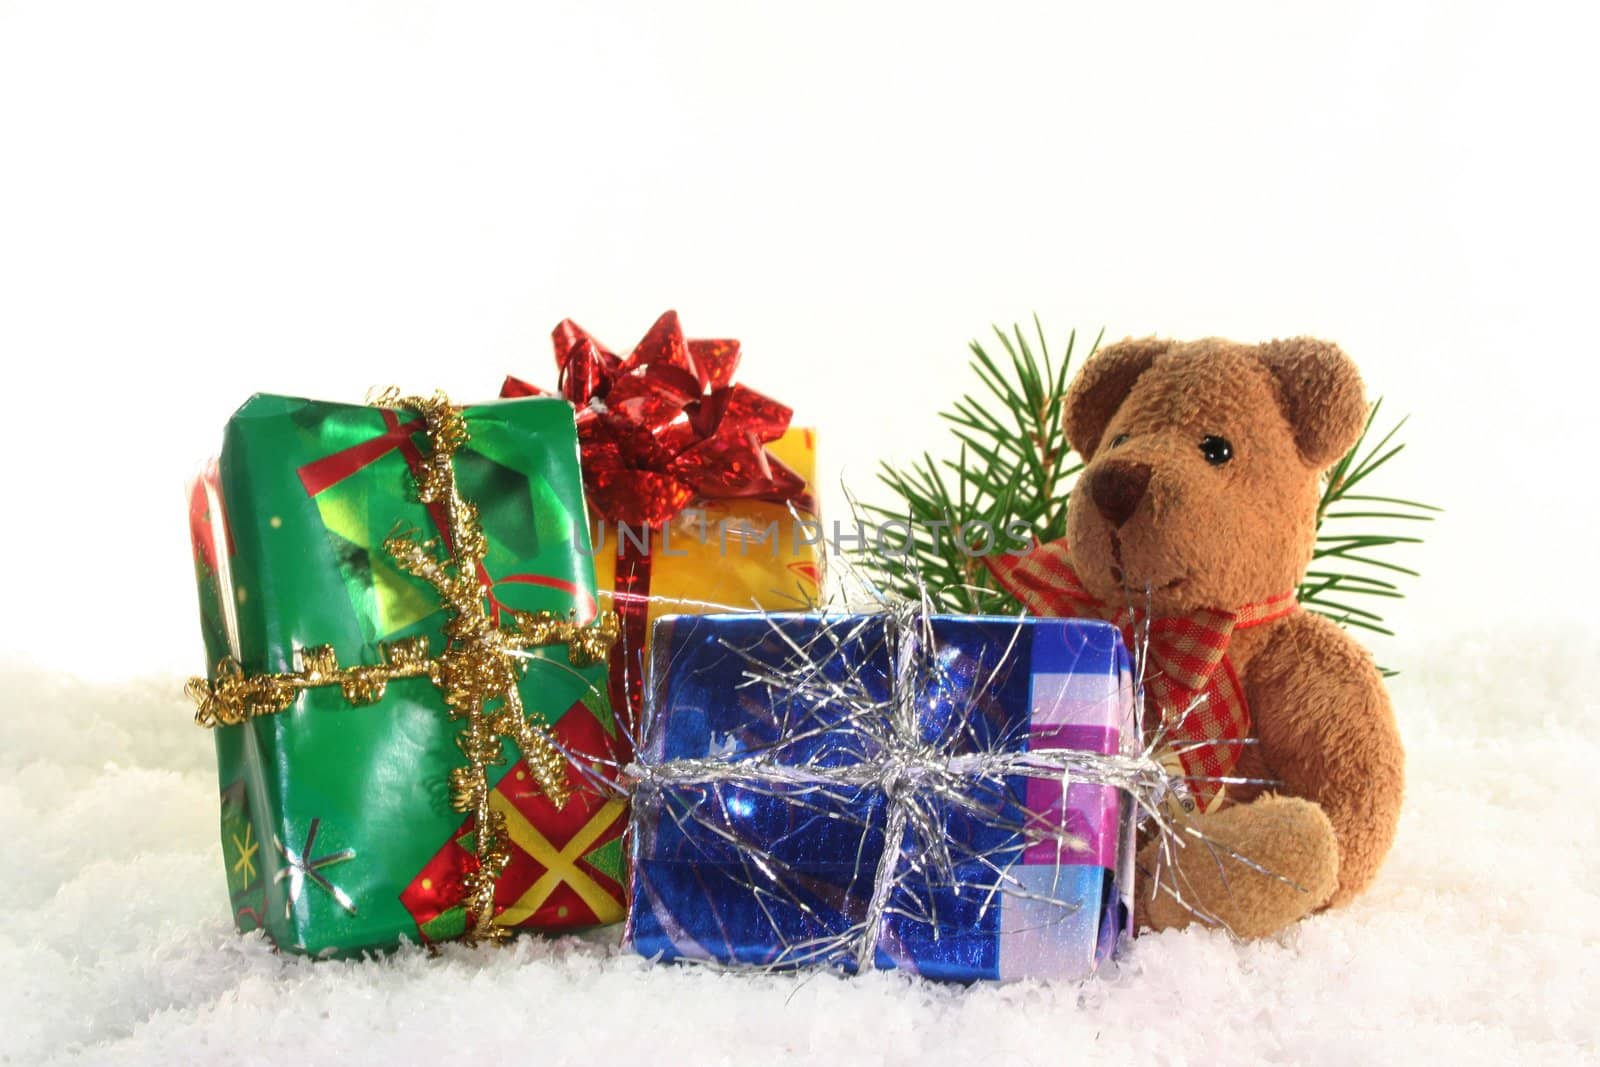 Christmas gifts by silencefoto